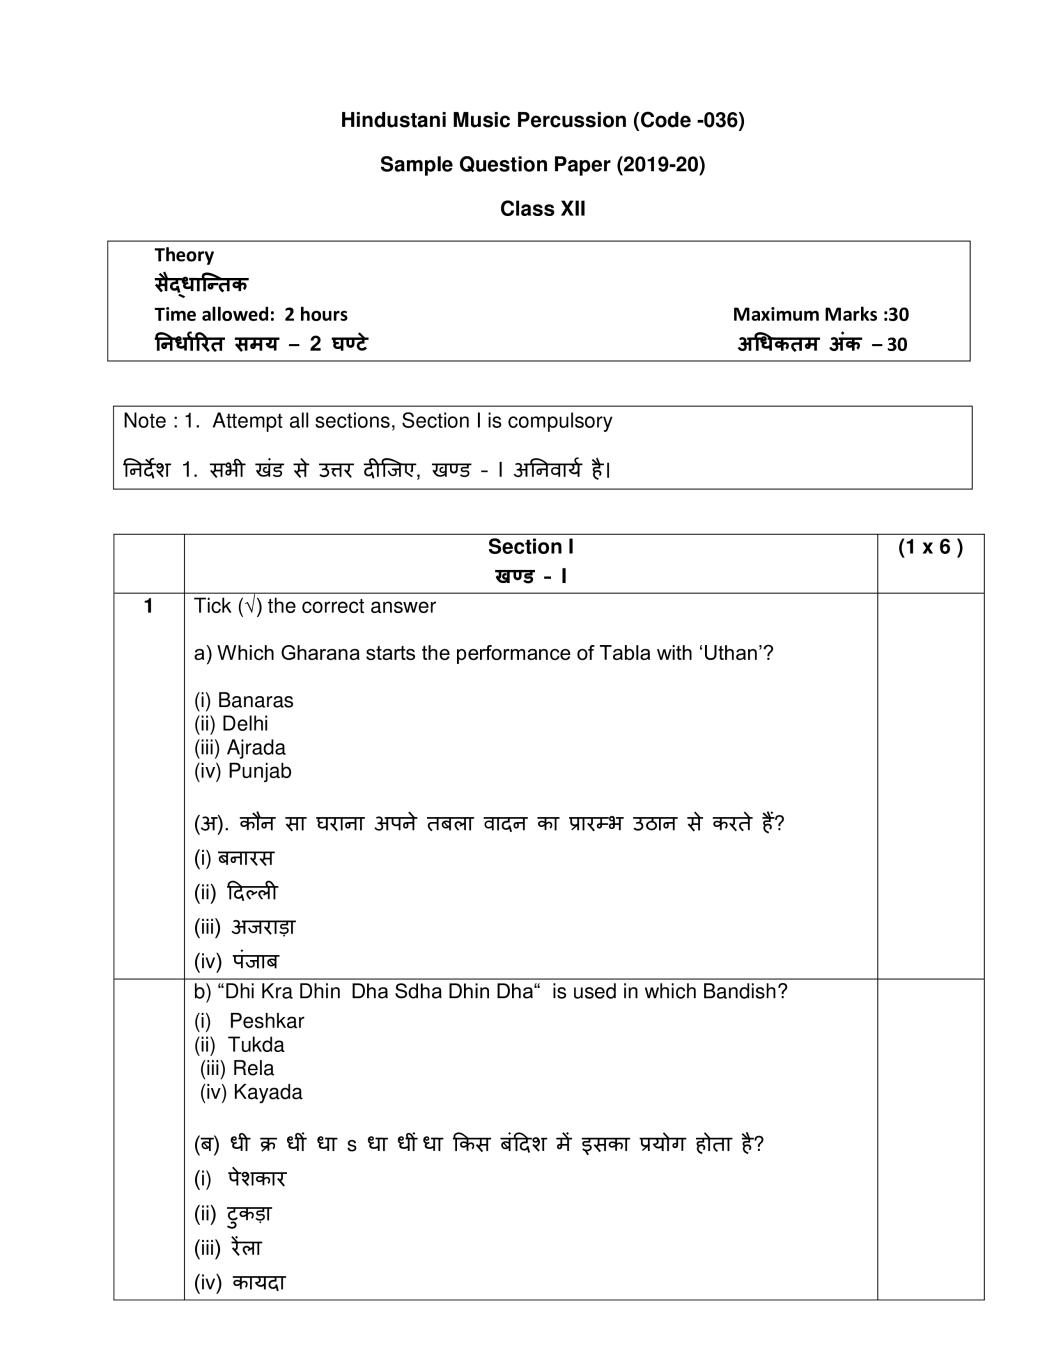 CBSE Class 12 Sample Paper 2020 for Hindustani Music Percussion Instruments - Page 1